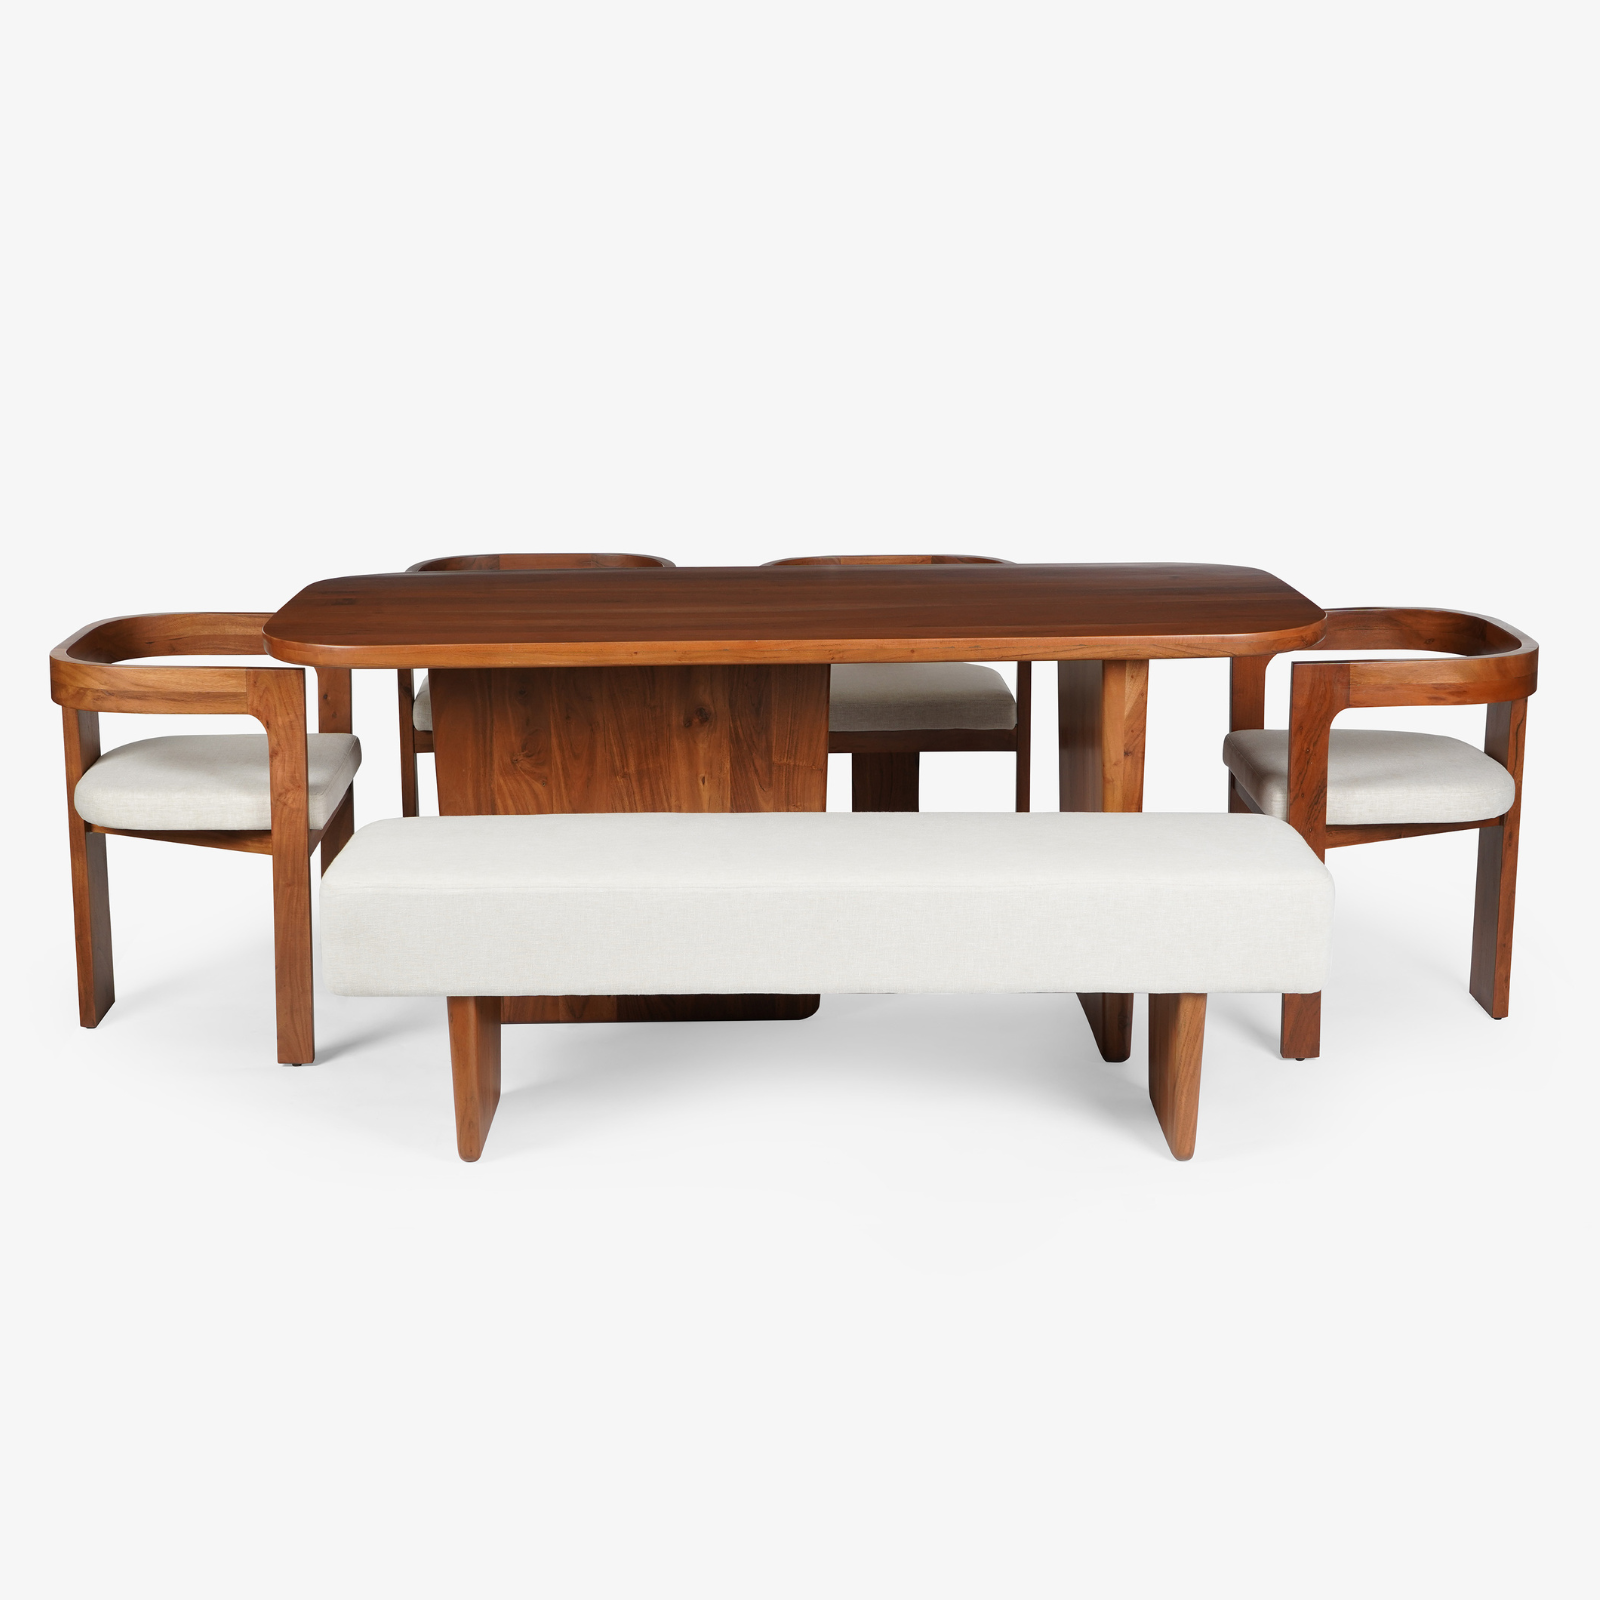 Attica Dining Table With 4 Anish Chairs And Bench